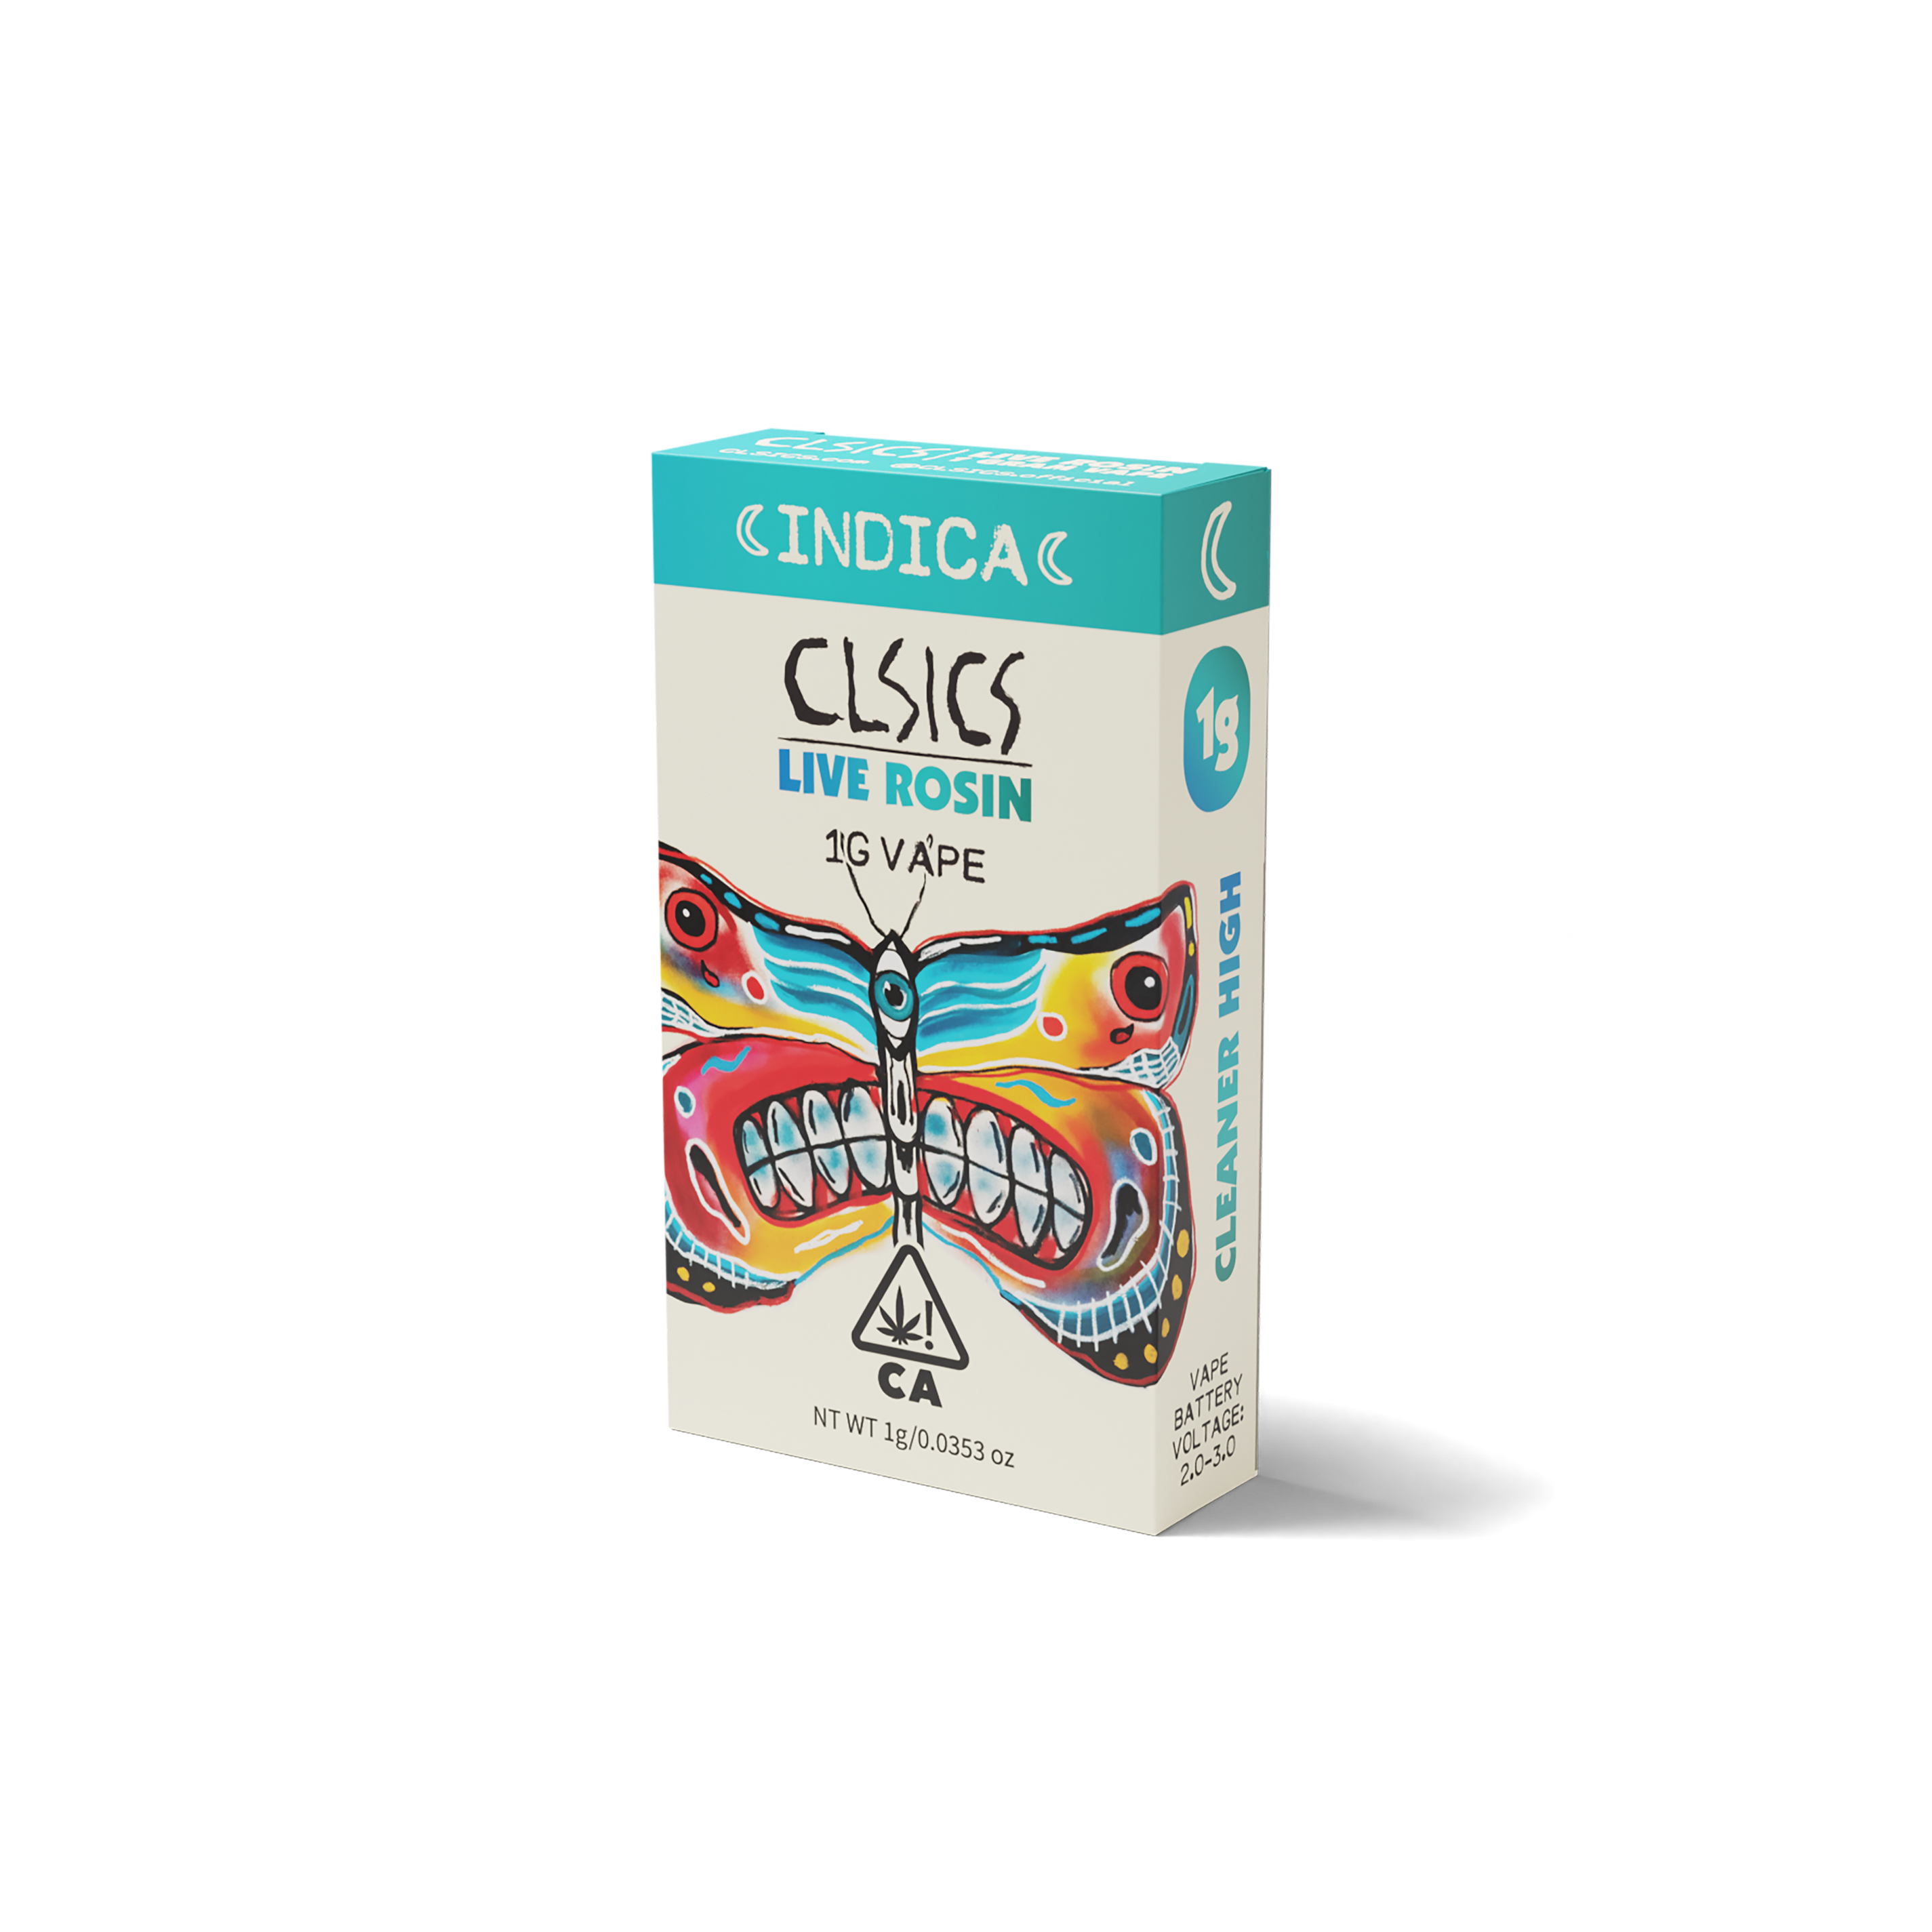 A photograph of CLSICS Live Rosin Cartridge 1g Indica Ghost Vapor